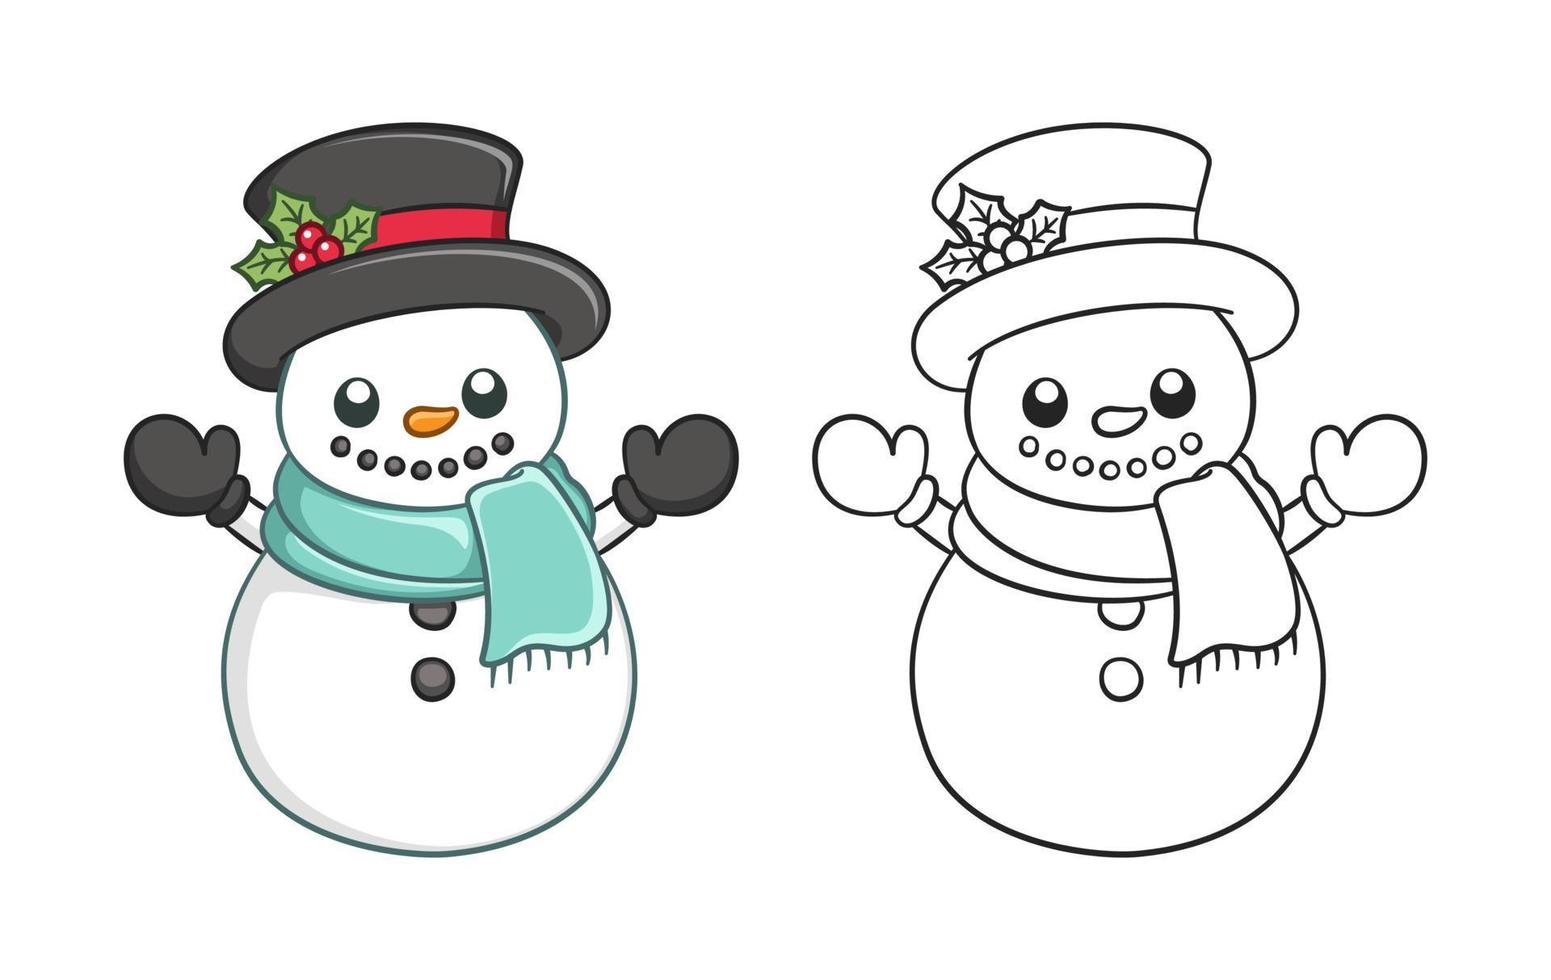 Cute snow man wearing a top hat with mistletoe and scarf outline and colored doodle cartoon illustration set. Winter Christmas theme coloring book page activity for kids and adults. vector